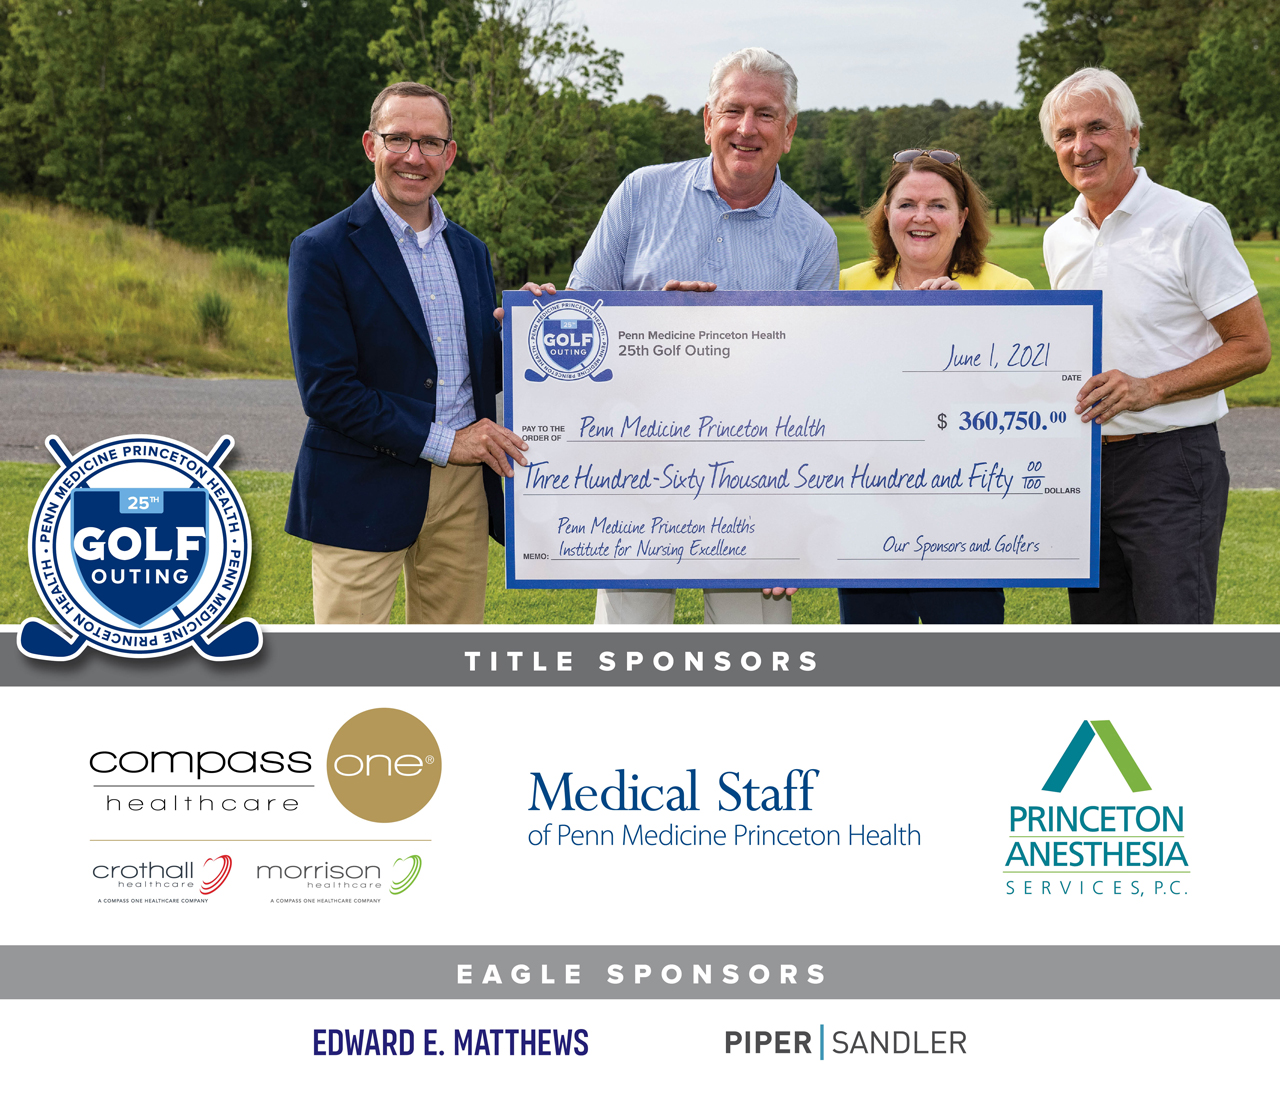 Image of 2021 Foundation Golf Outing and sponsors